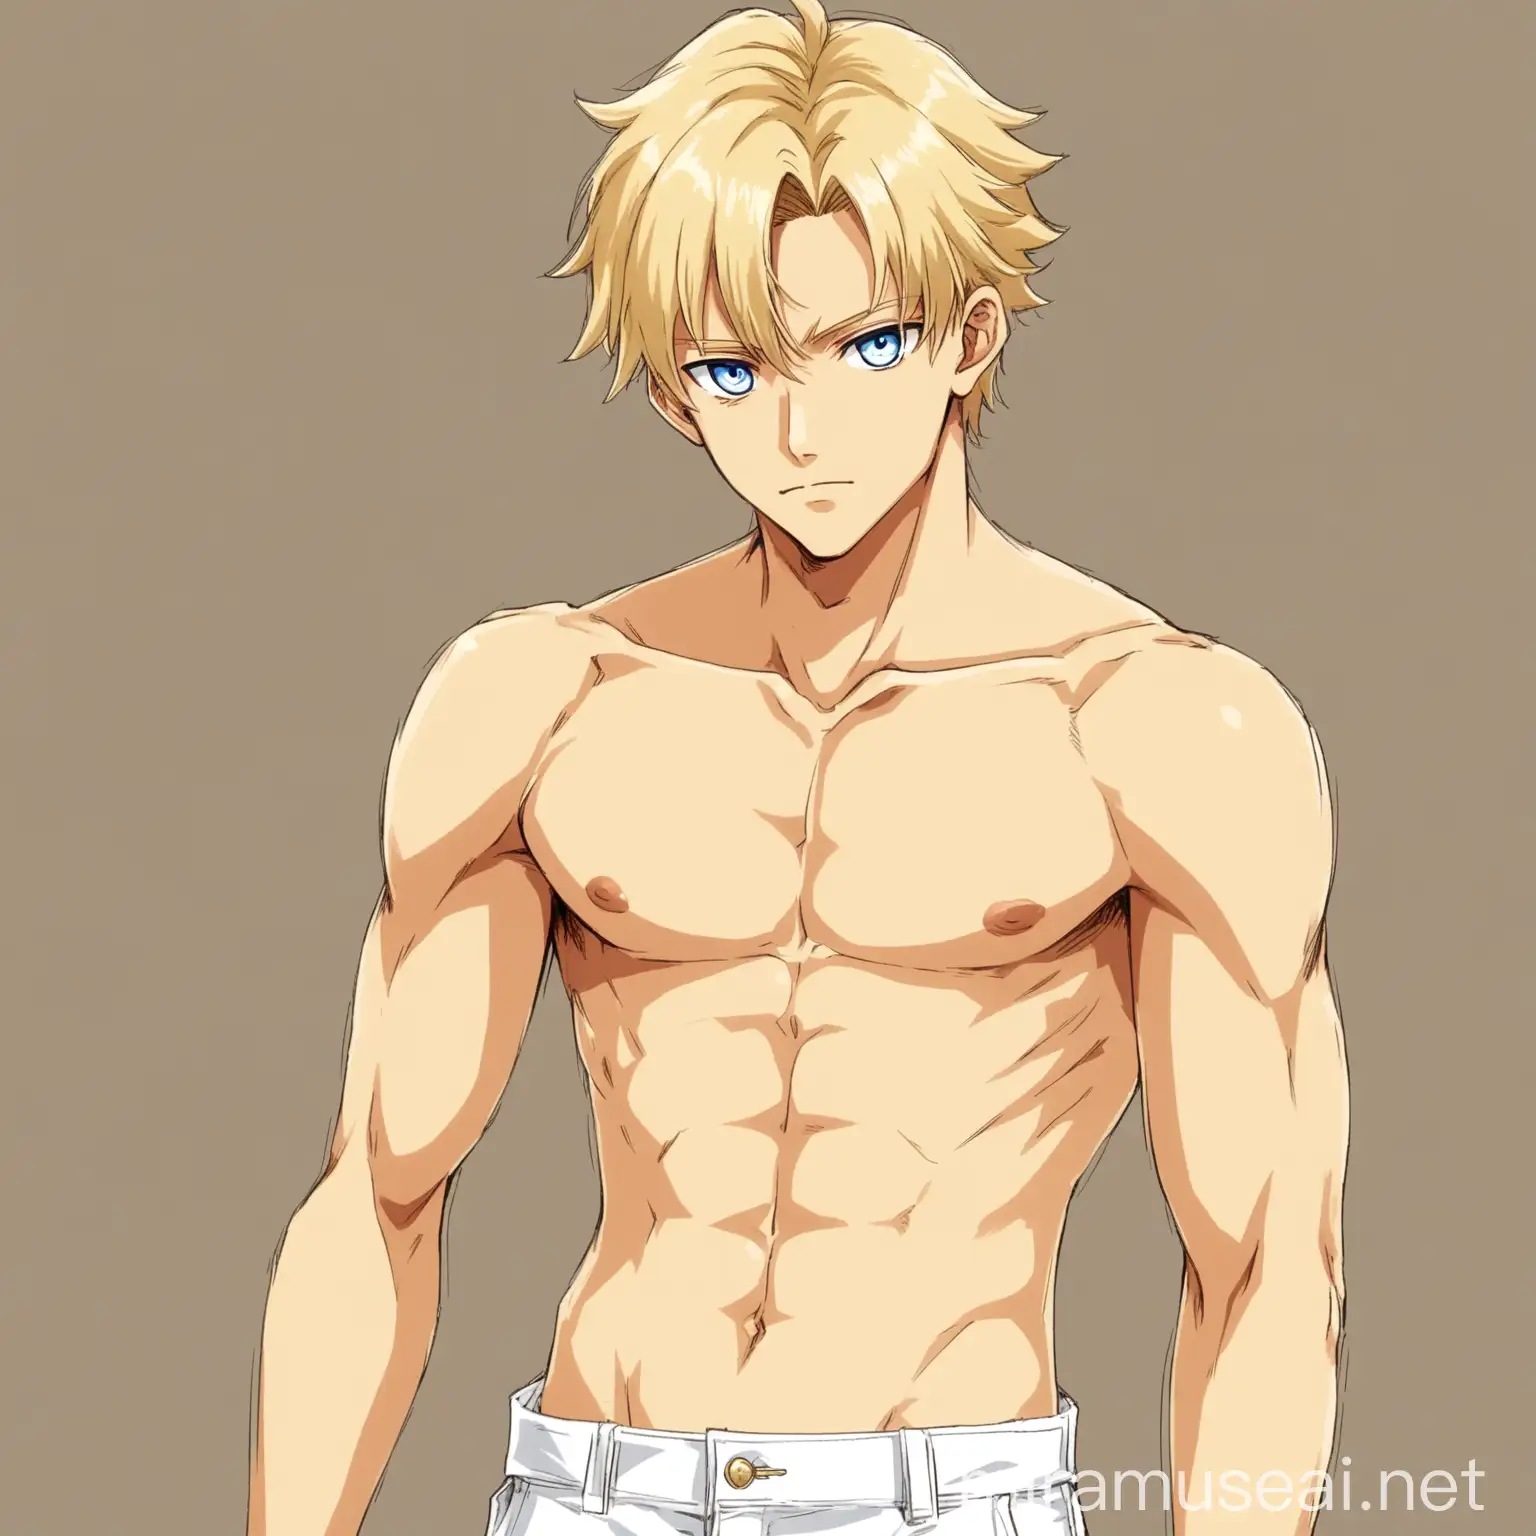 Handsome blonde anime  shirtless boy, he must be in his twenties, he have blu eyes. He have white pants. Draw in One Piece by Eichiro Oda artstyle. he has masculine facial features but which also have the sweetness of feminime. Draw his entire body